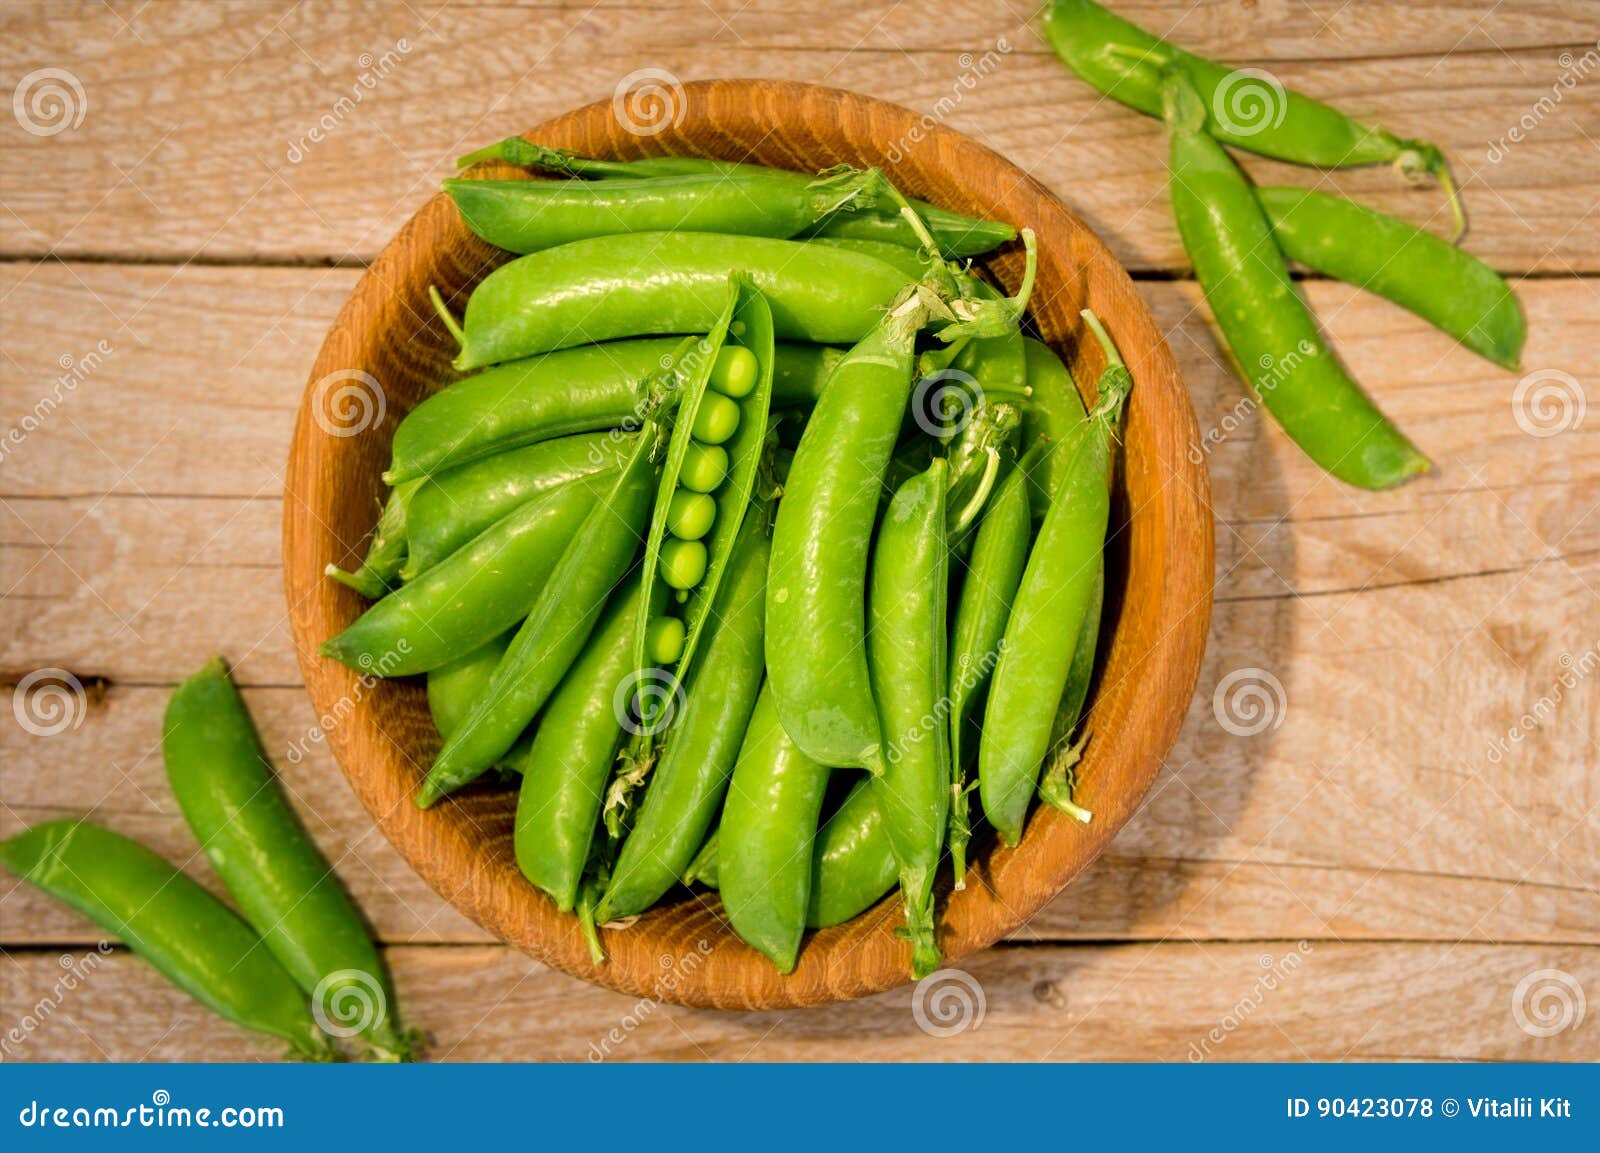 Download Green Peas In Wooden Bowl On Wooden Background. Stock ...